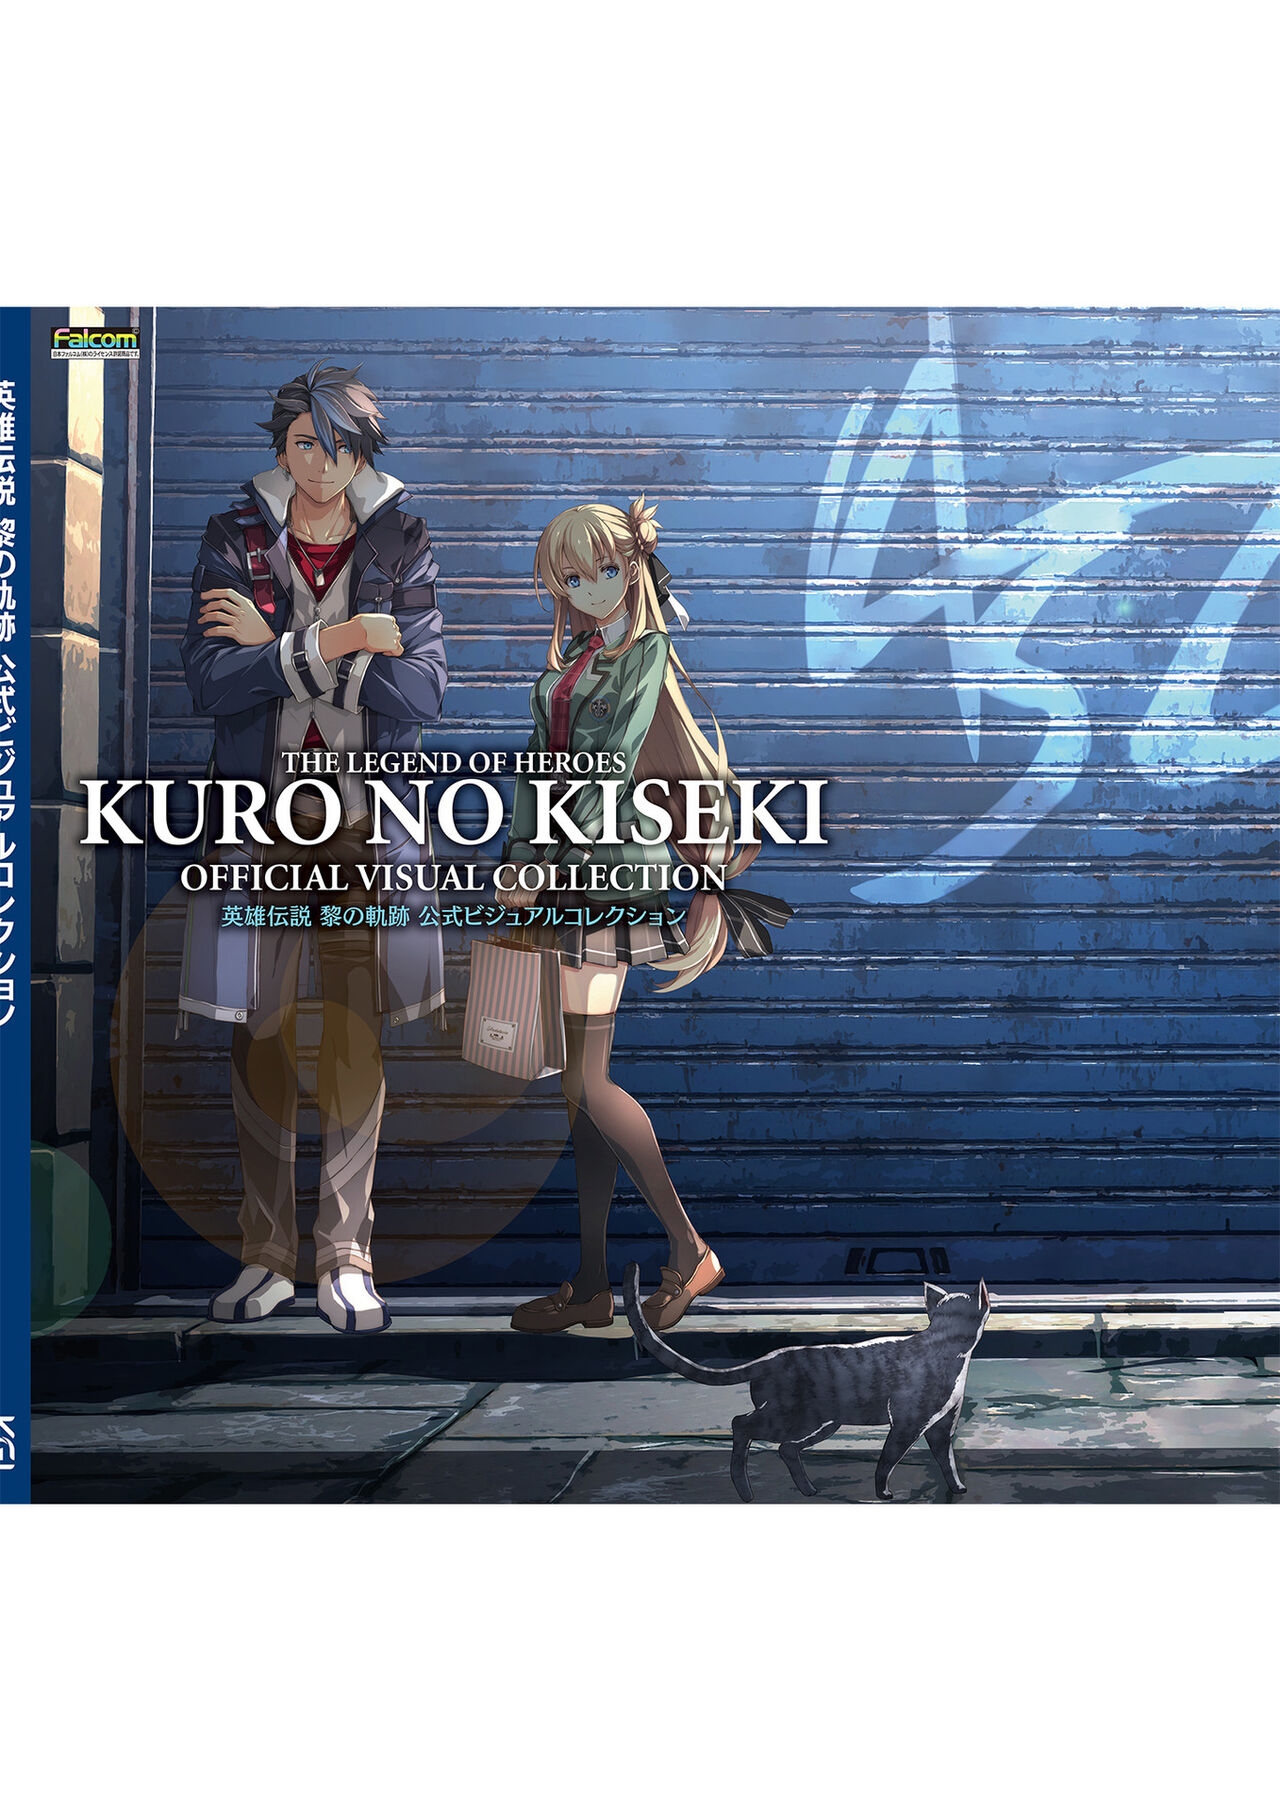 The Legend of Heroes: Kuro no Kiseki Official Visual Collection 228